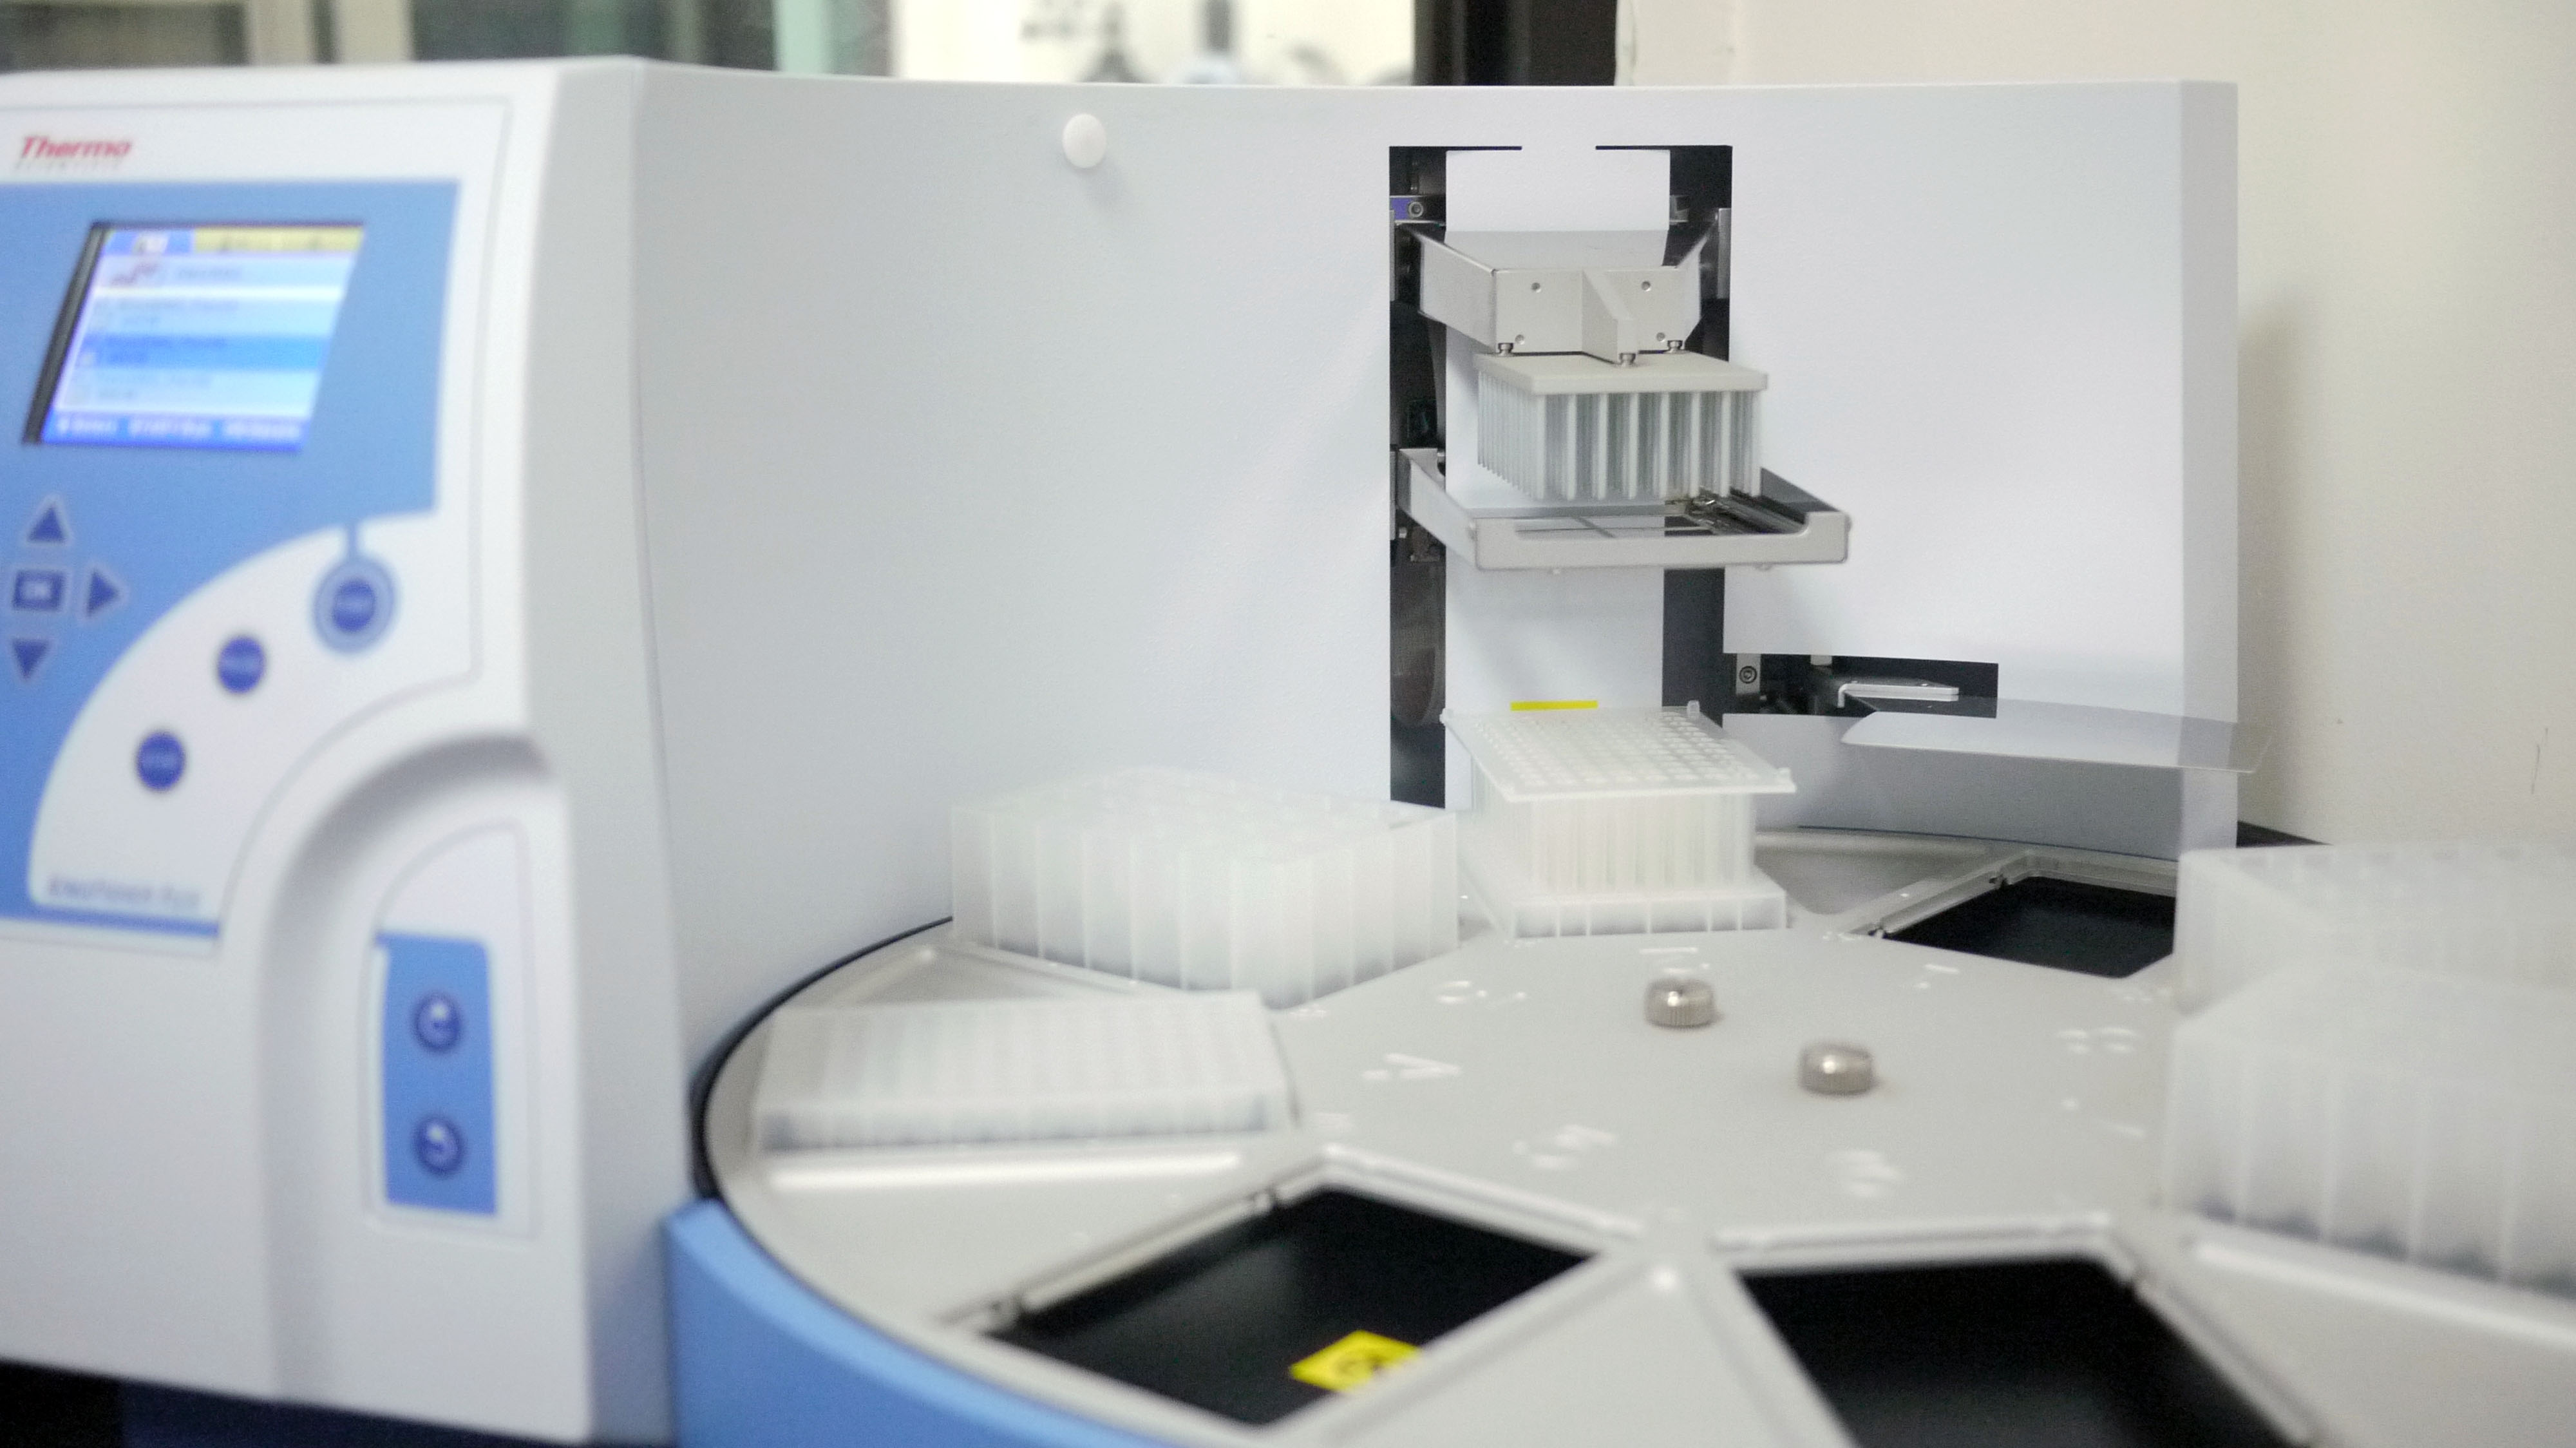 The KingFisher Flex instrumentation device allows for rapid automated extraction of RNA or DNA from COVID-19 test samples 